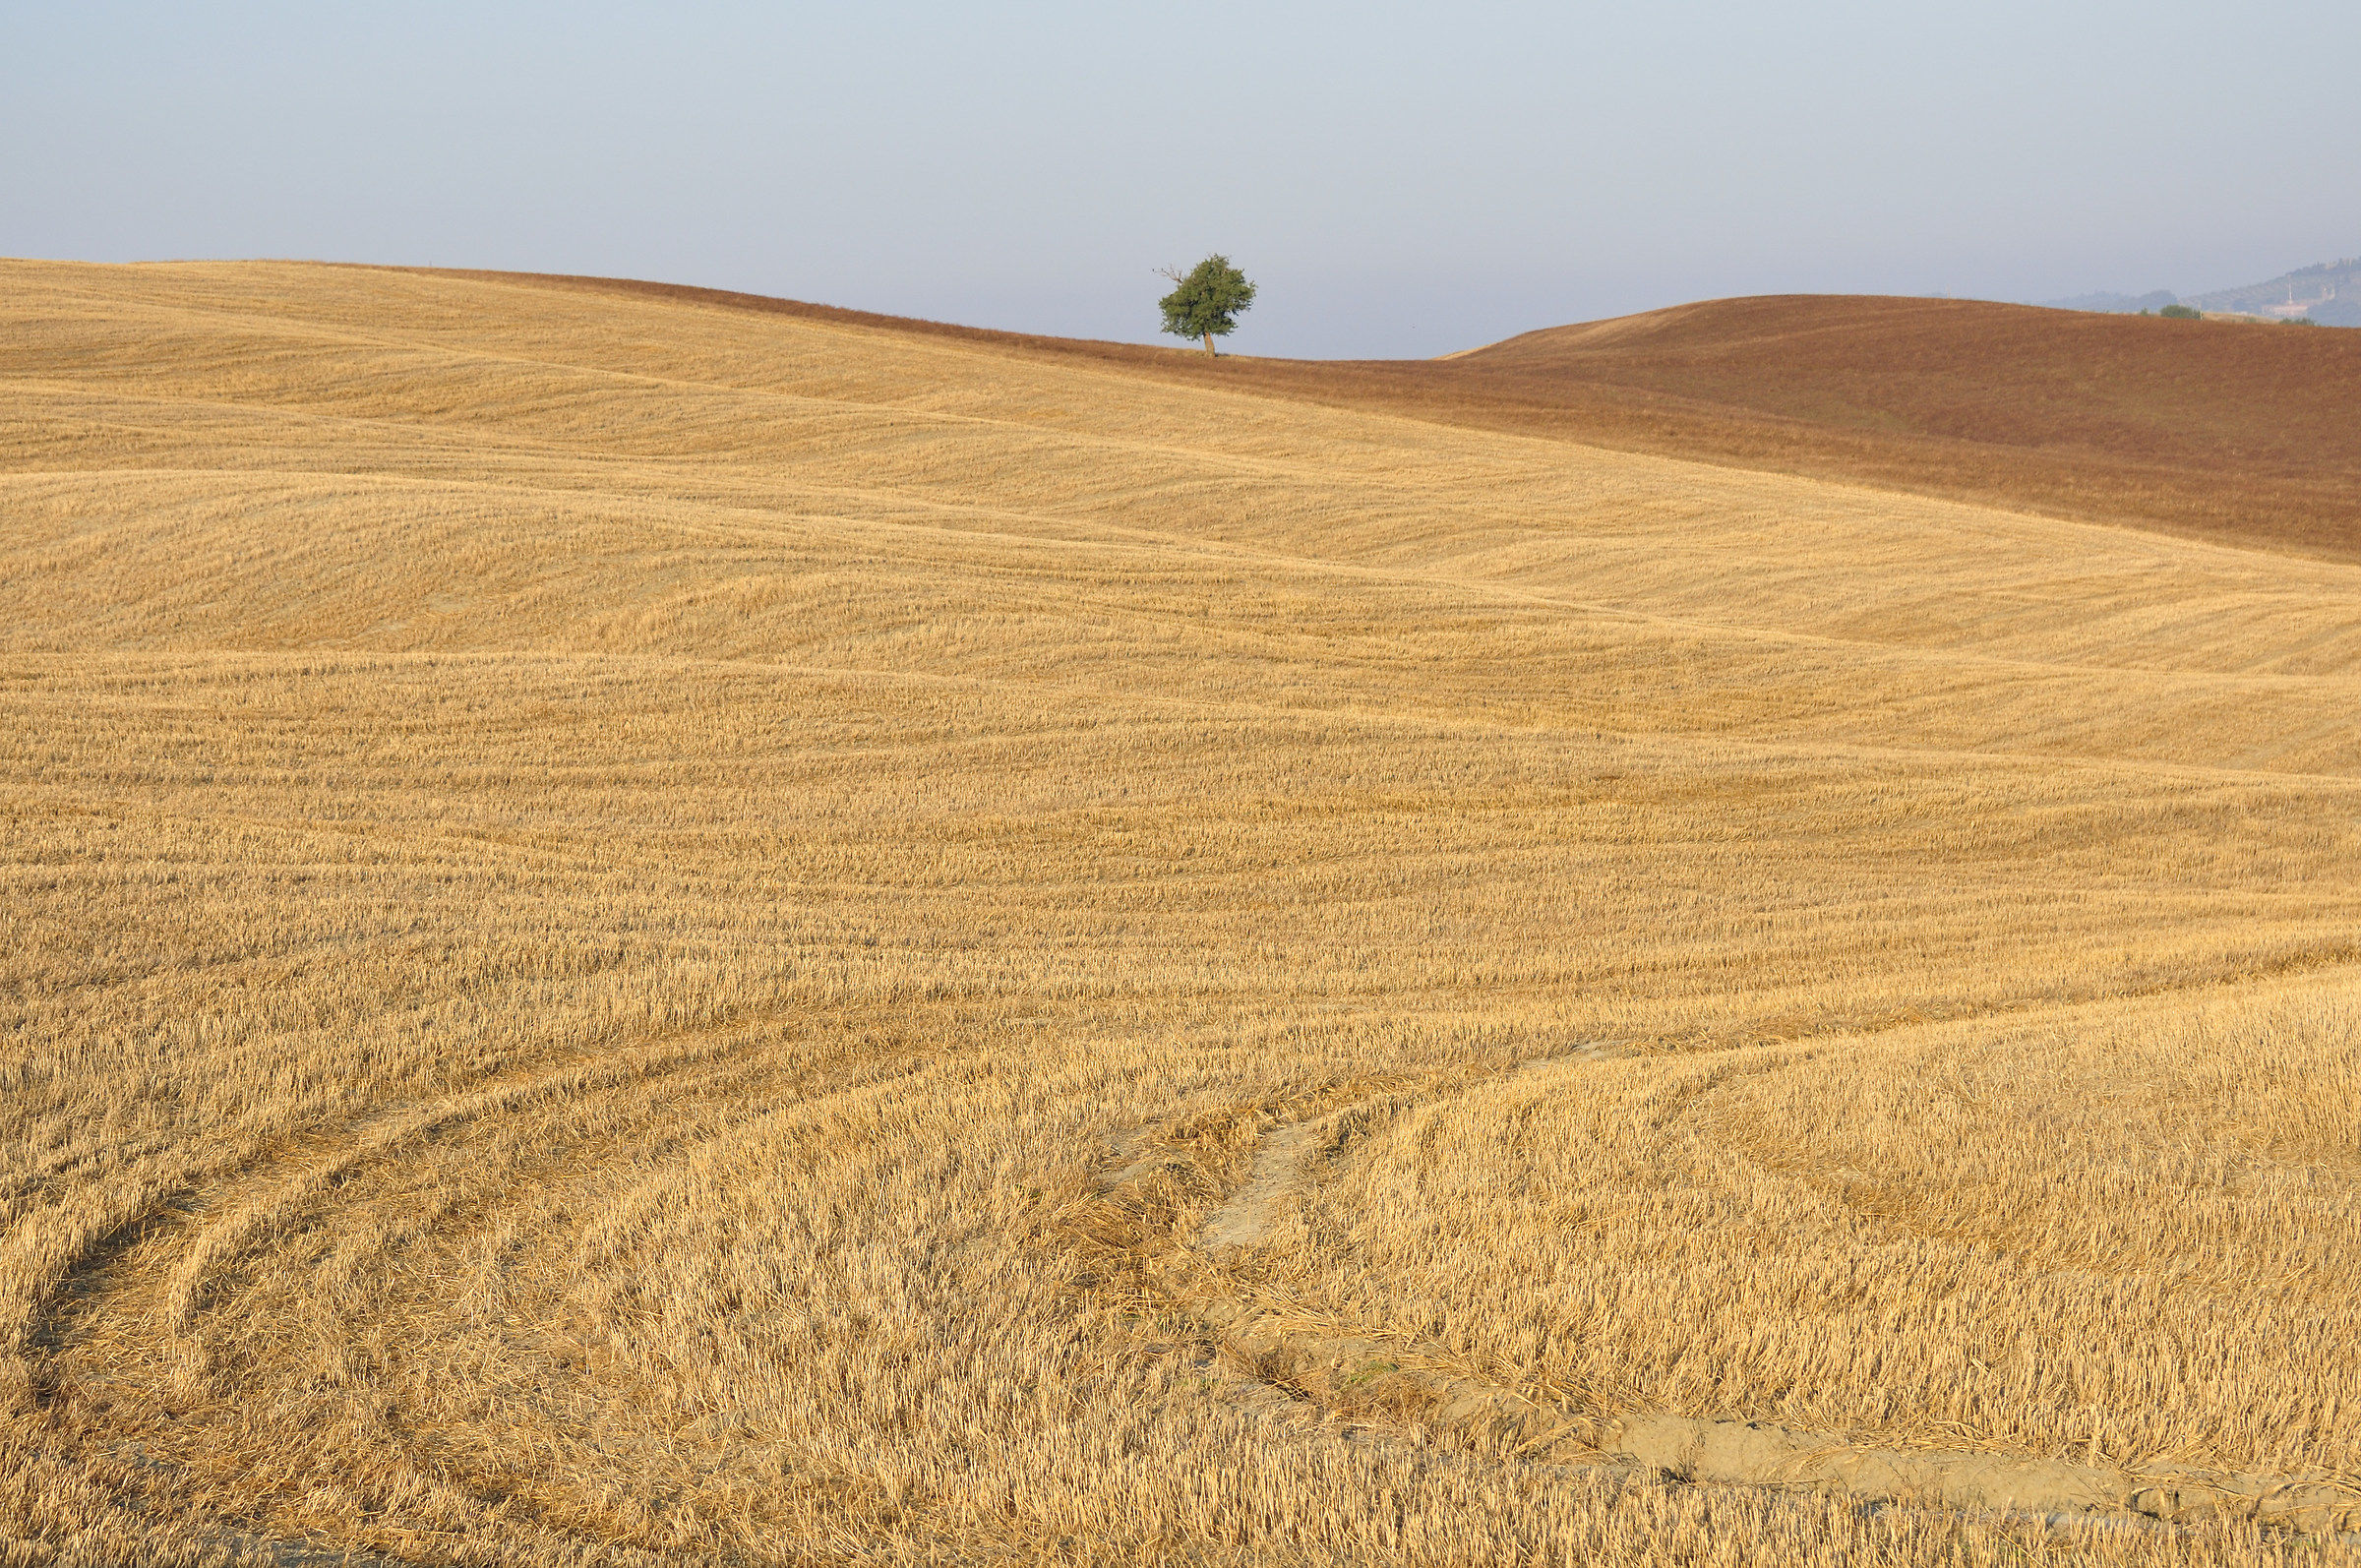 July in Val d'Orcia...